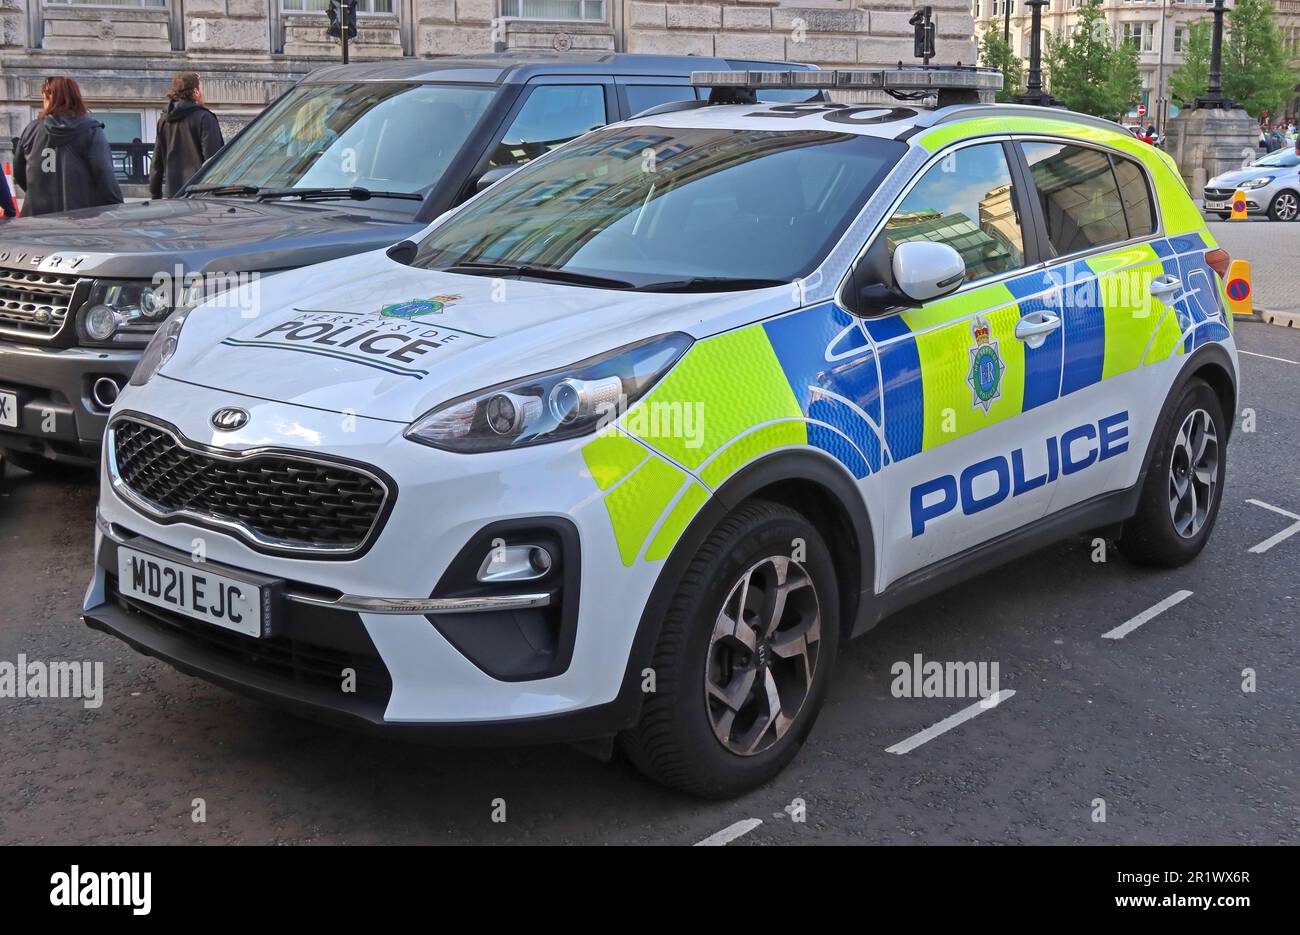 Merseyside police vehicle, Kia,  MD21EJC, parked in the Albert Dock, Liverpool city centre, Merseyside, England, UK, L3 4AF Stock Photo